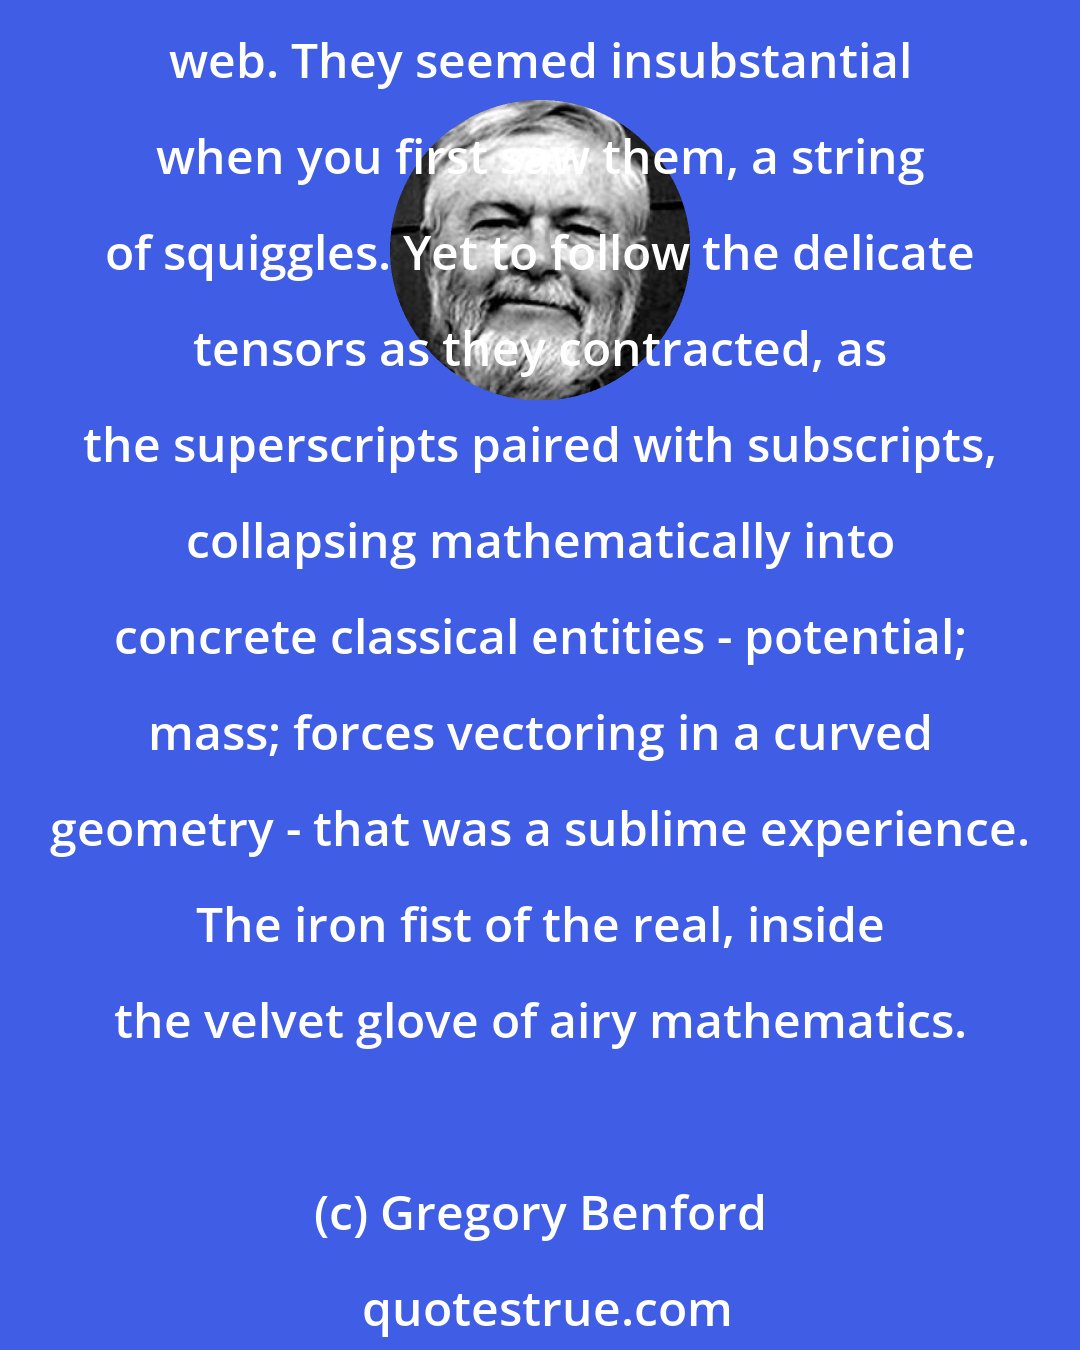 Gregory Benford: There was a blithe certainty that came from first comprehending the full Einstein field equations, arabesques of Greek letters clinging tenuously to the page, a gossamer web. They seemed insubstantial when you first saw them, a string of squiggles. Yet to follow the delicate tensors as they contracted, as the superscripts paired with subscripts, collapsing mathematically into concrete classical entities - potential; mass; forces vectoring in a curved geometry - that was a sublime experience. The iron fist of the real, inside the velvet glove of airy mathematics.